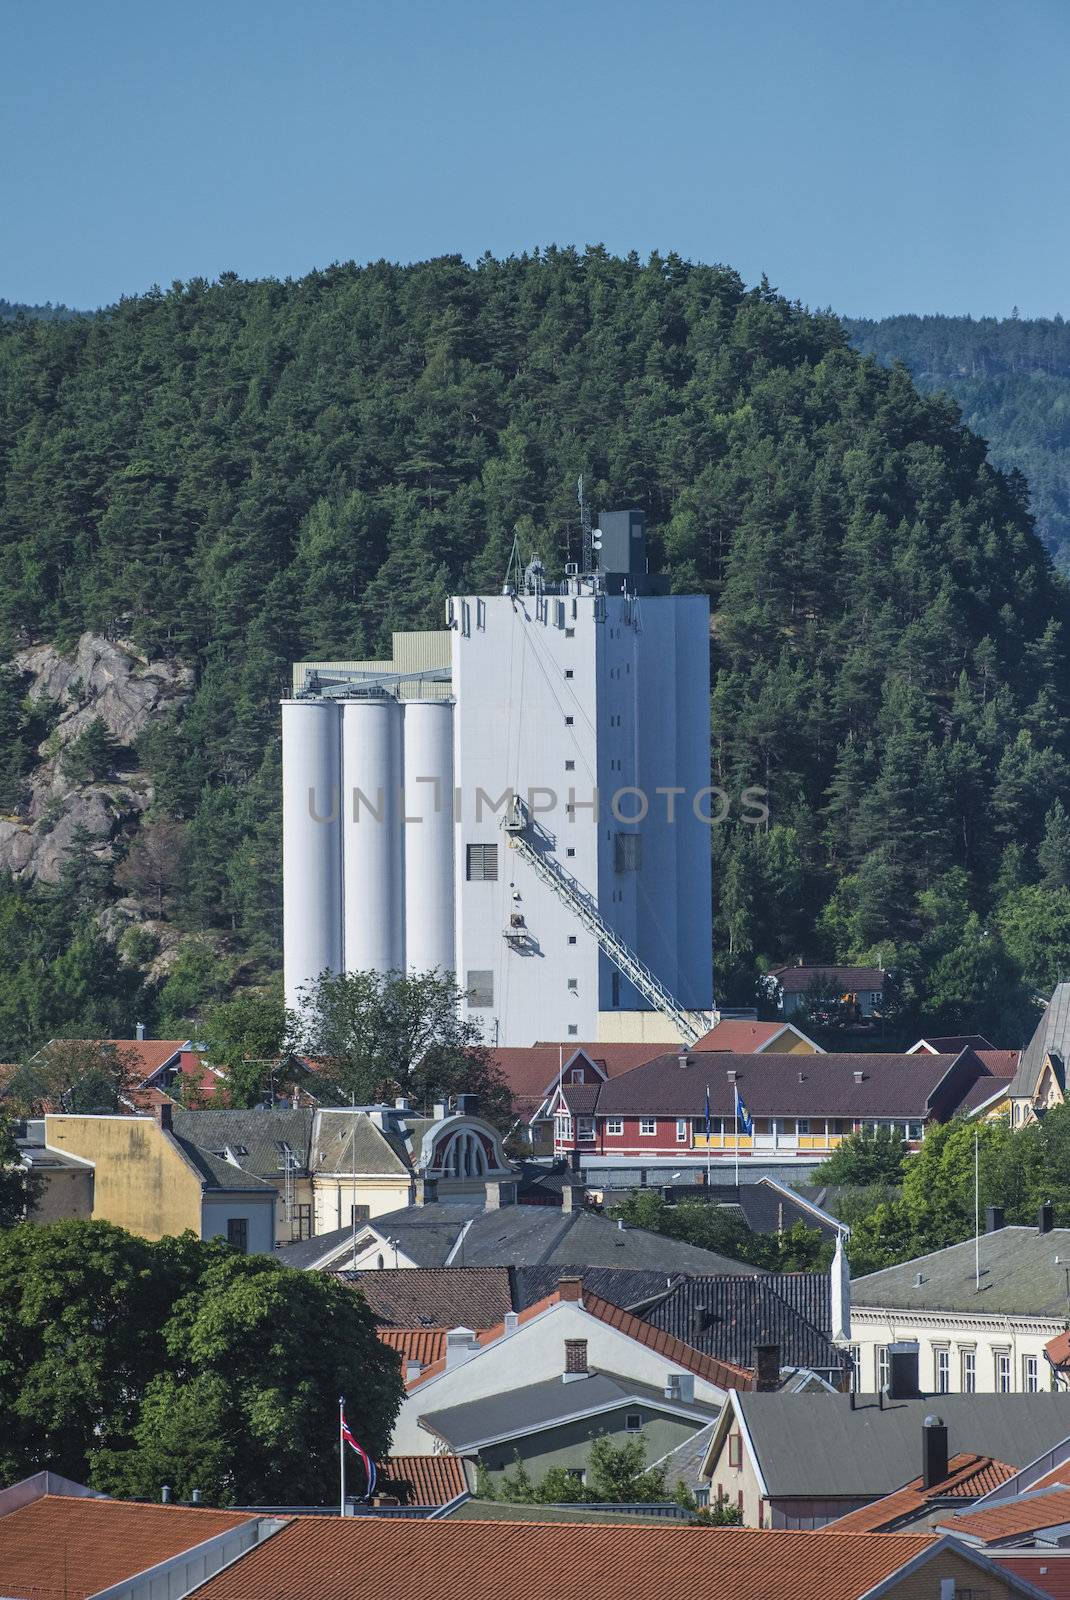 Grain silo is located on the quay at the port of Halden, Norway.